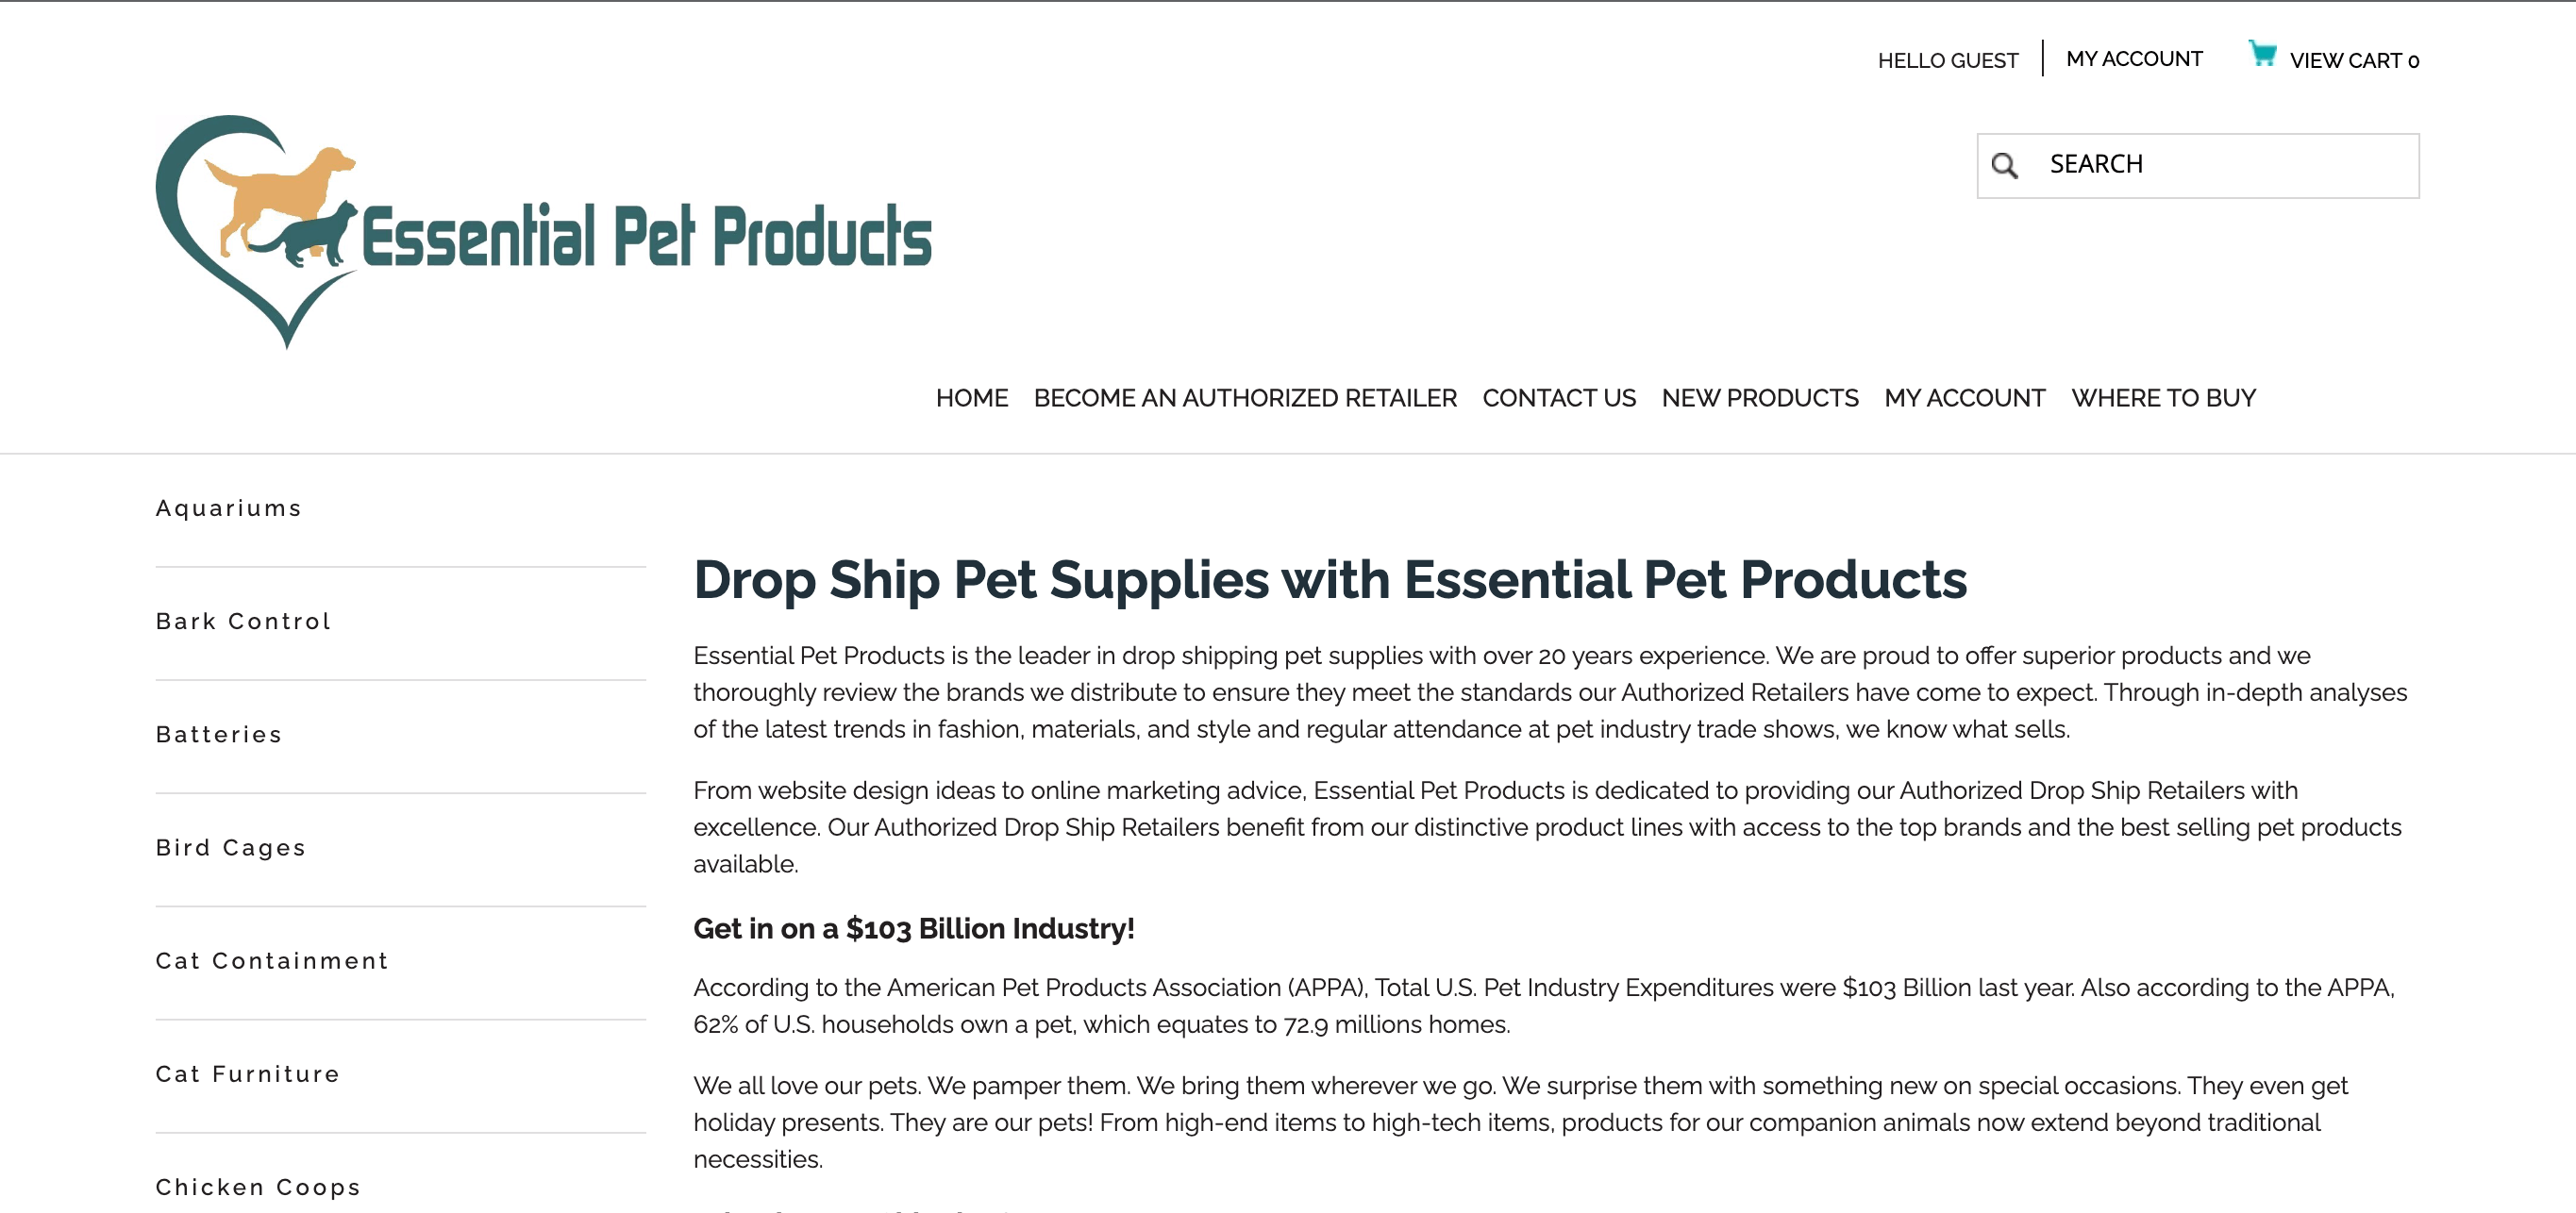 Essential Pet Products' homepage